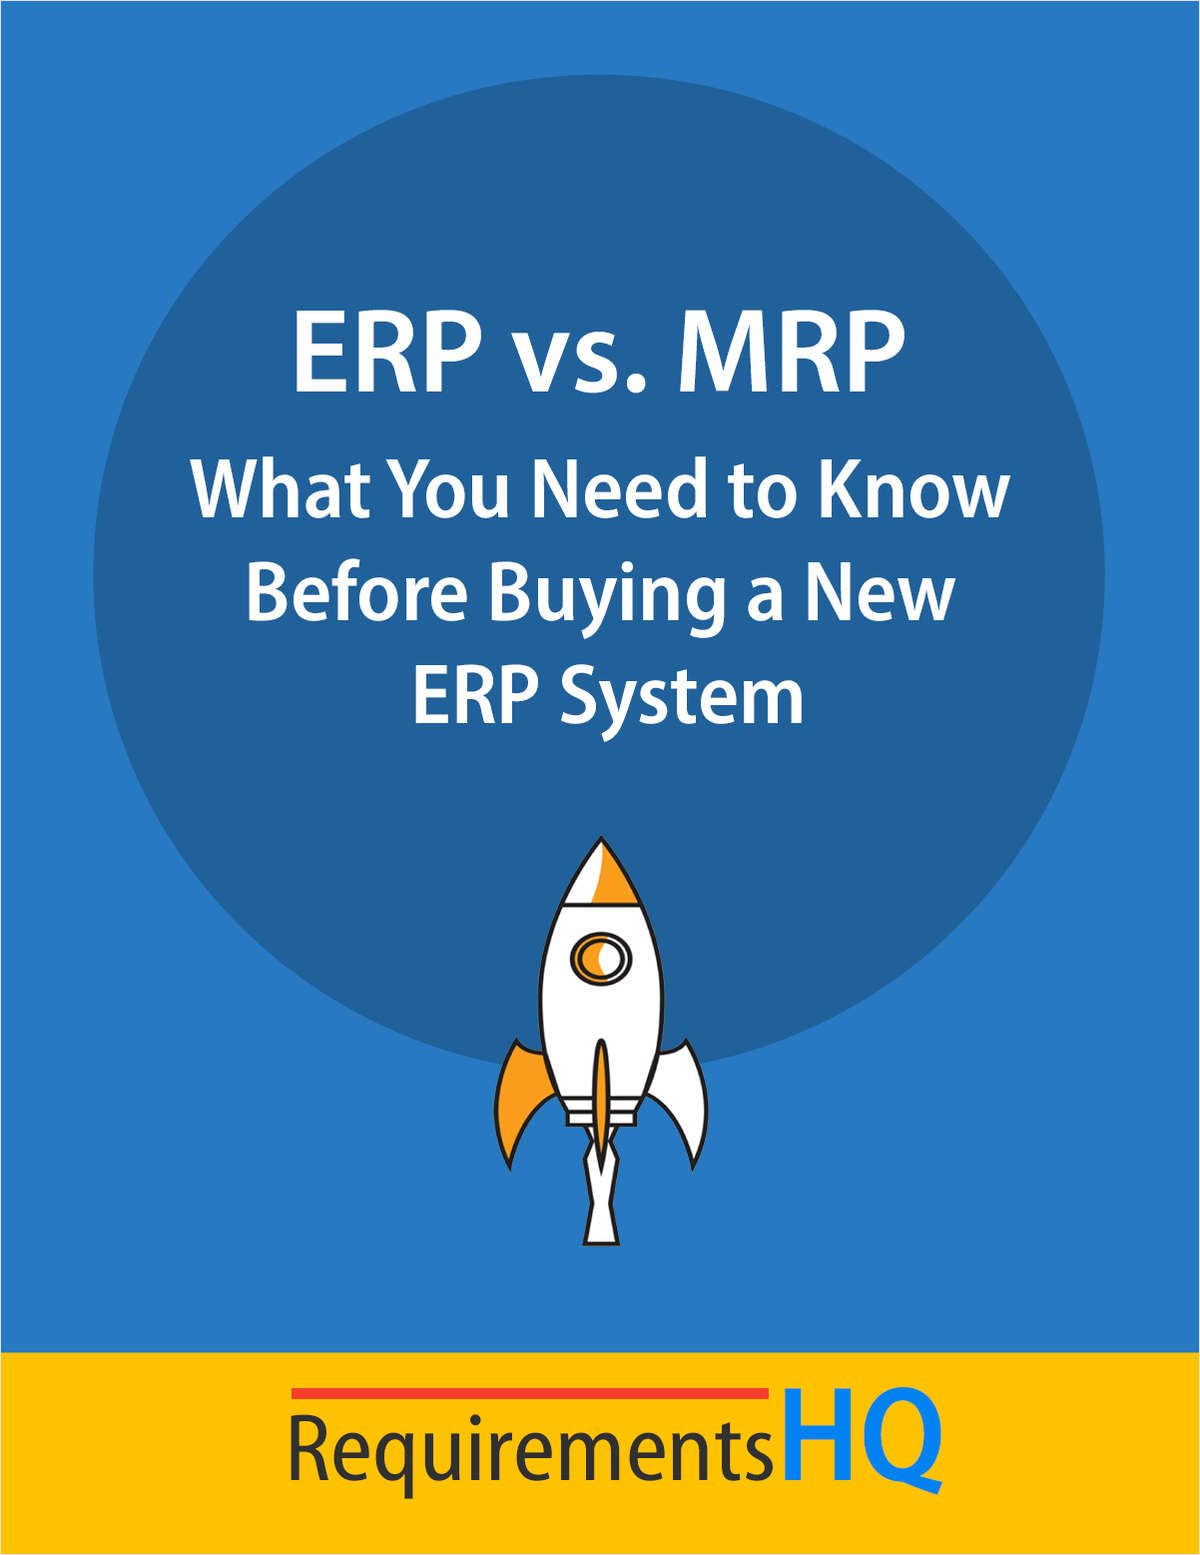 ERP vs. MRP: What You Need to Know Before Buying a New ERP System